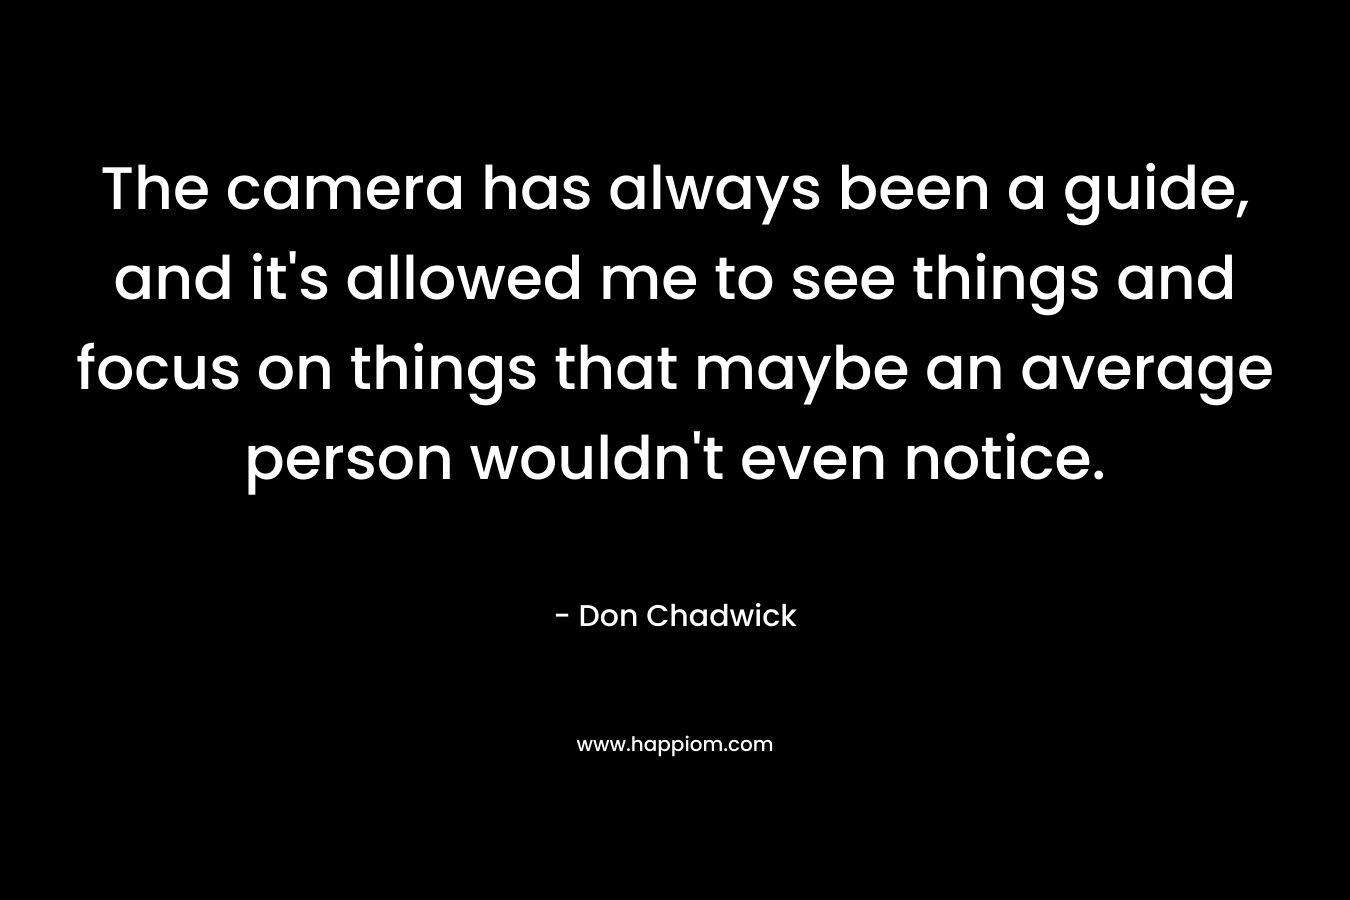 The camera has always been a guide, and it’s allowed me to see things and focus on things that maybe an average person wouldn’t even notice. – Don Chadwick